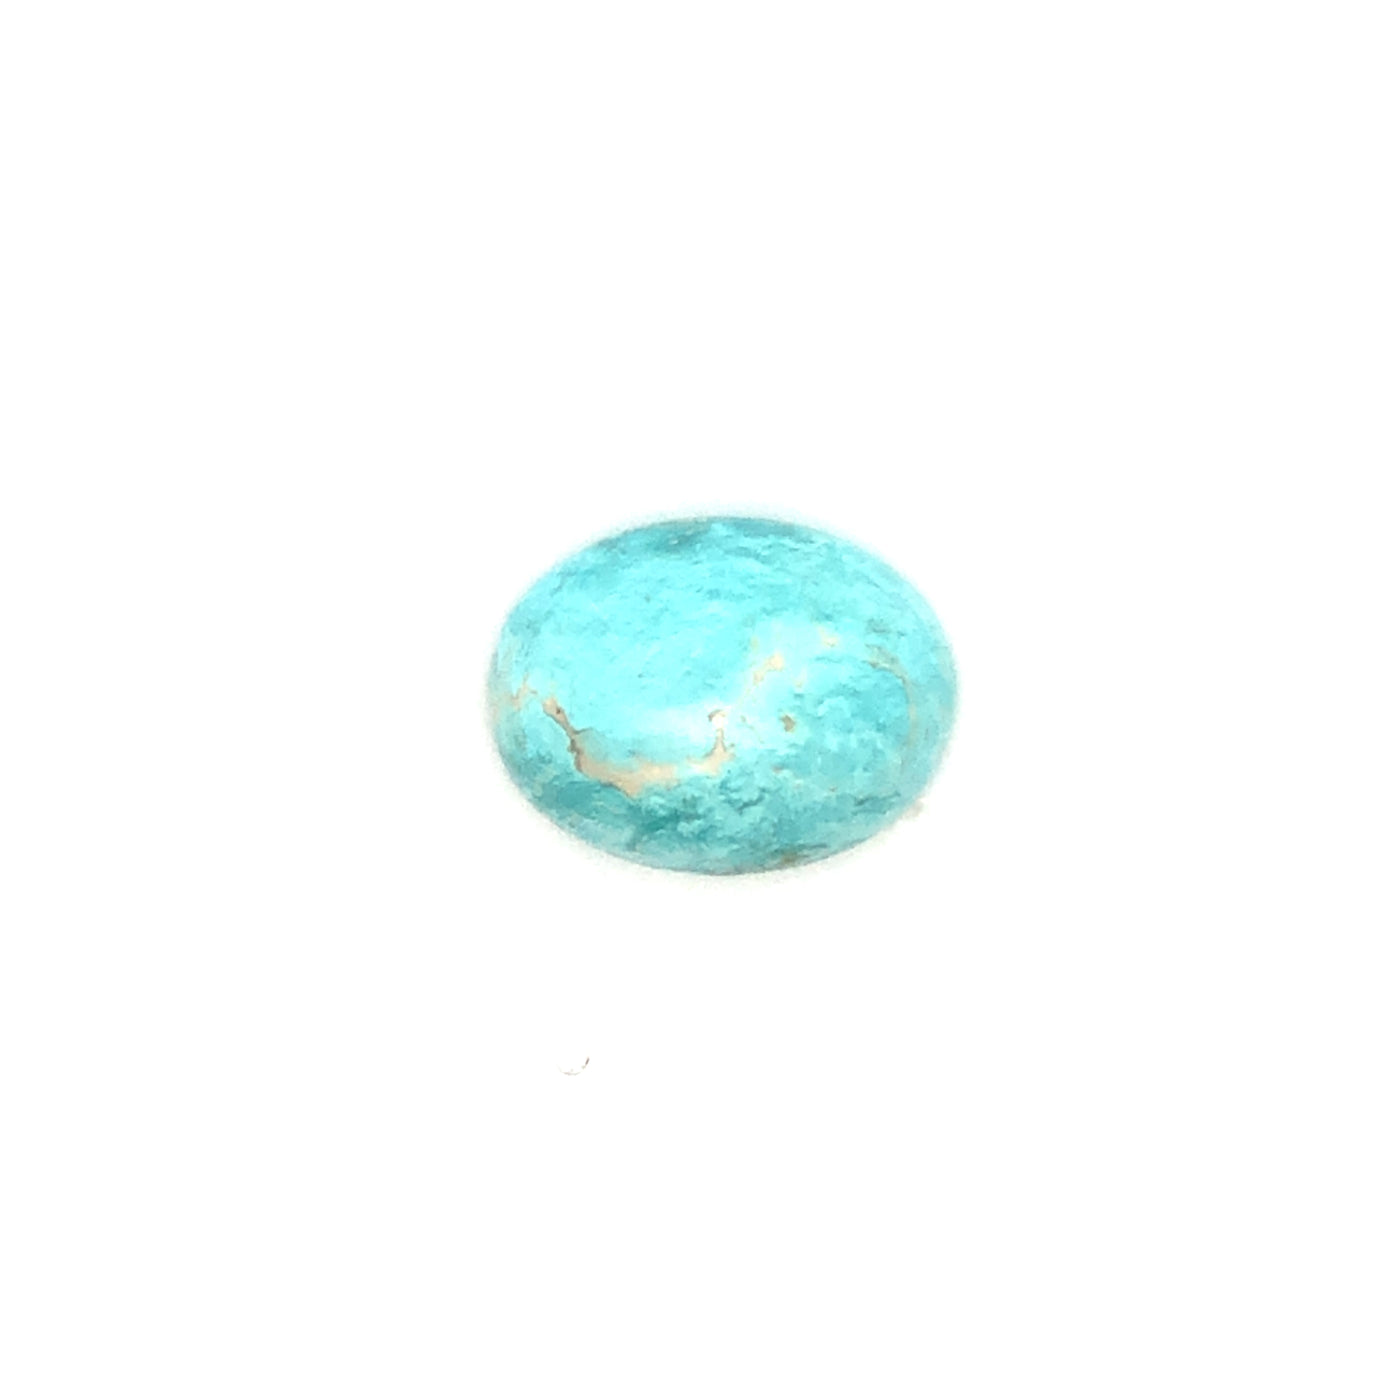 Loose Narooma Turquoise Oval Shaped 20.13Ct Blue With Some White